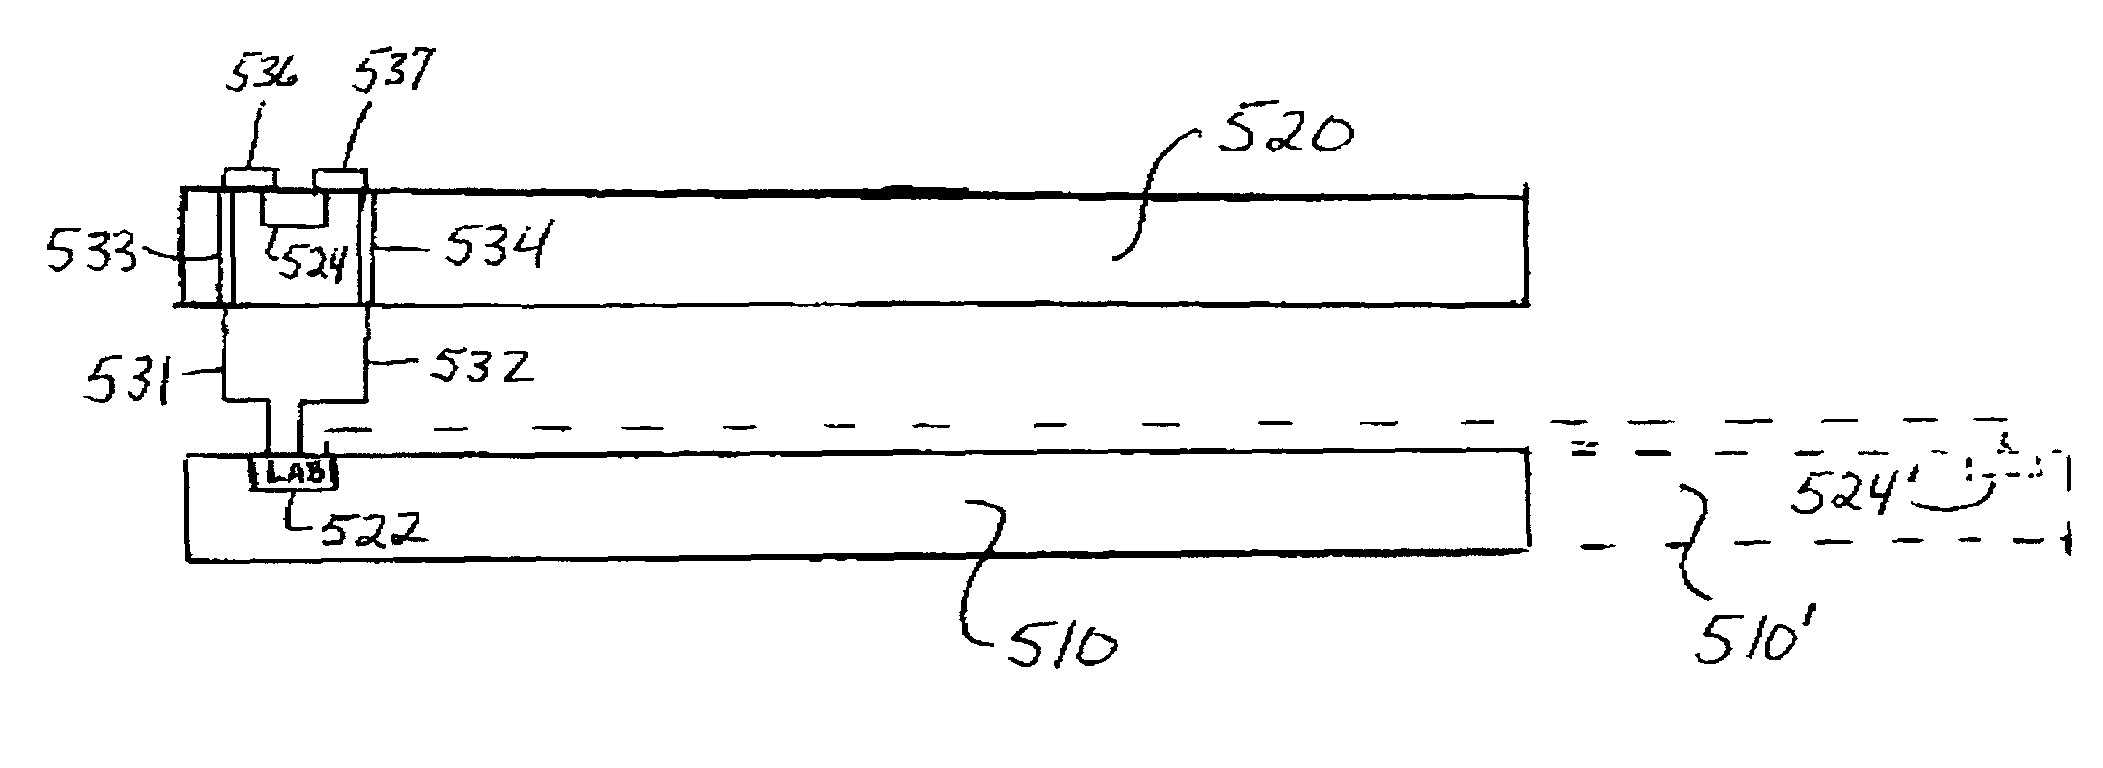 Circuit distribution to multiple integrated circuits